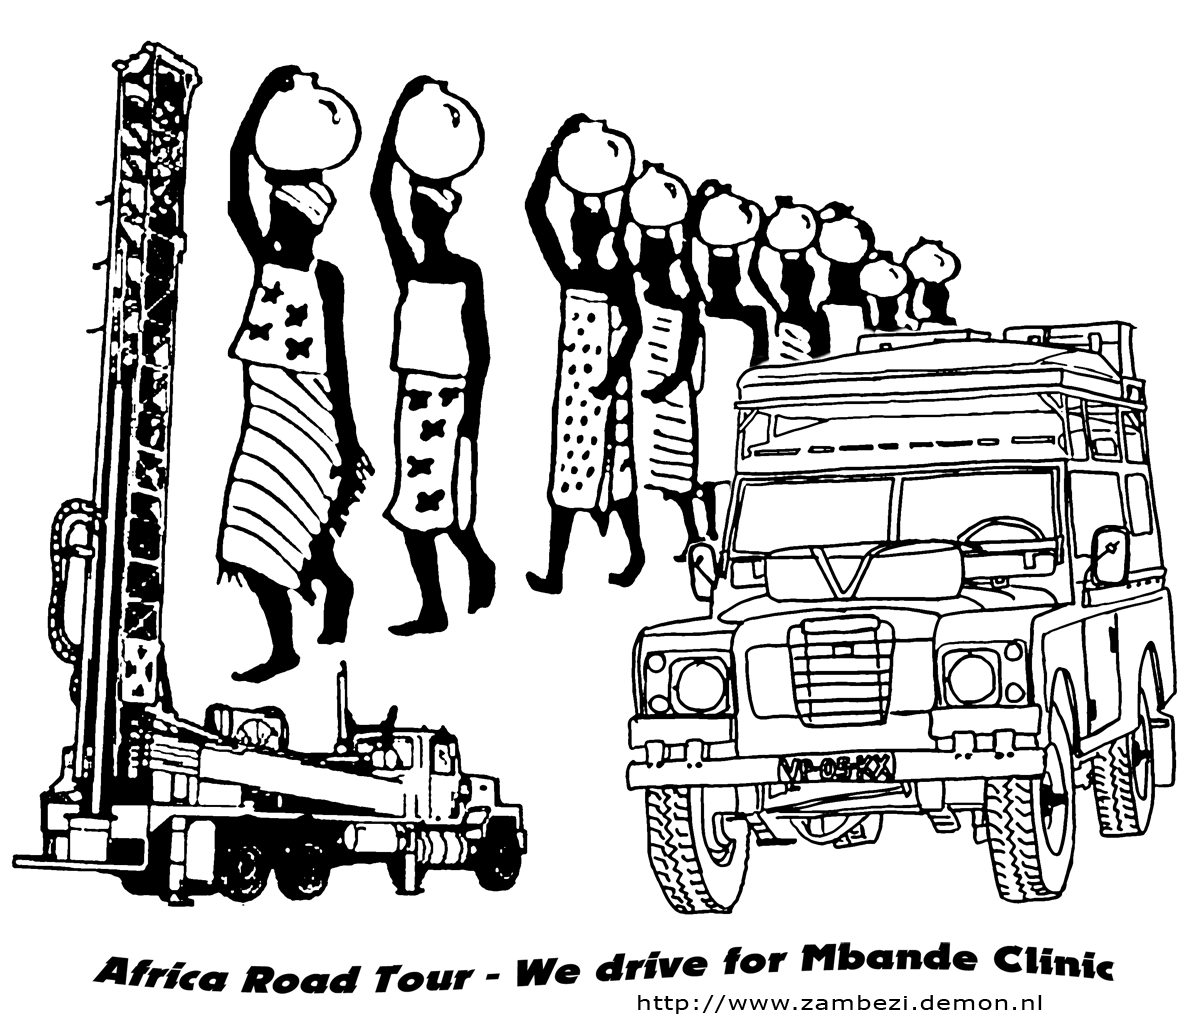 Going back where we started. An African Road Trip 2005...